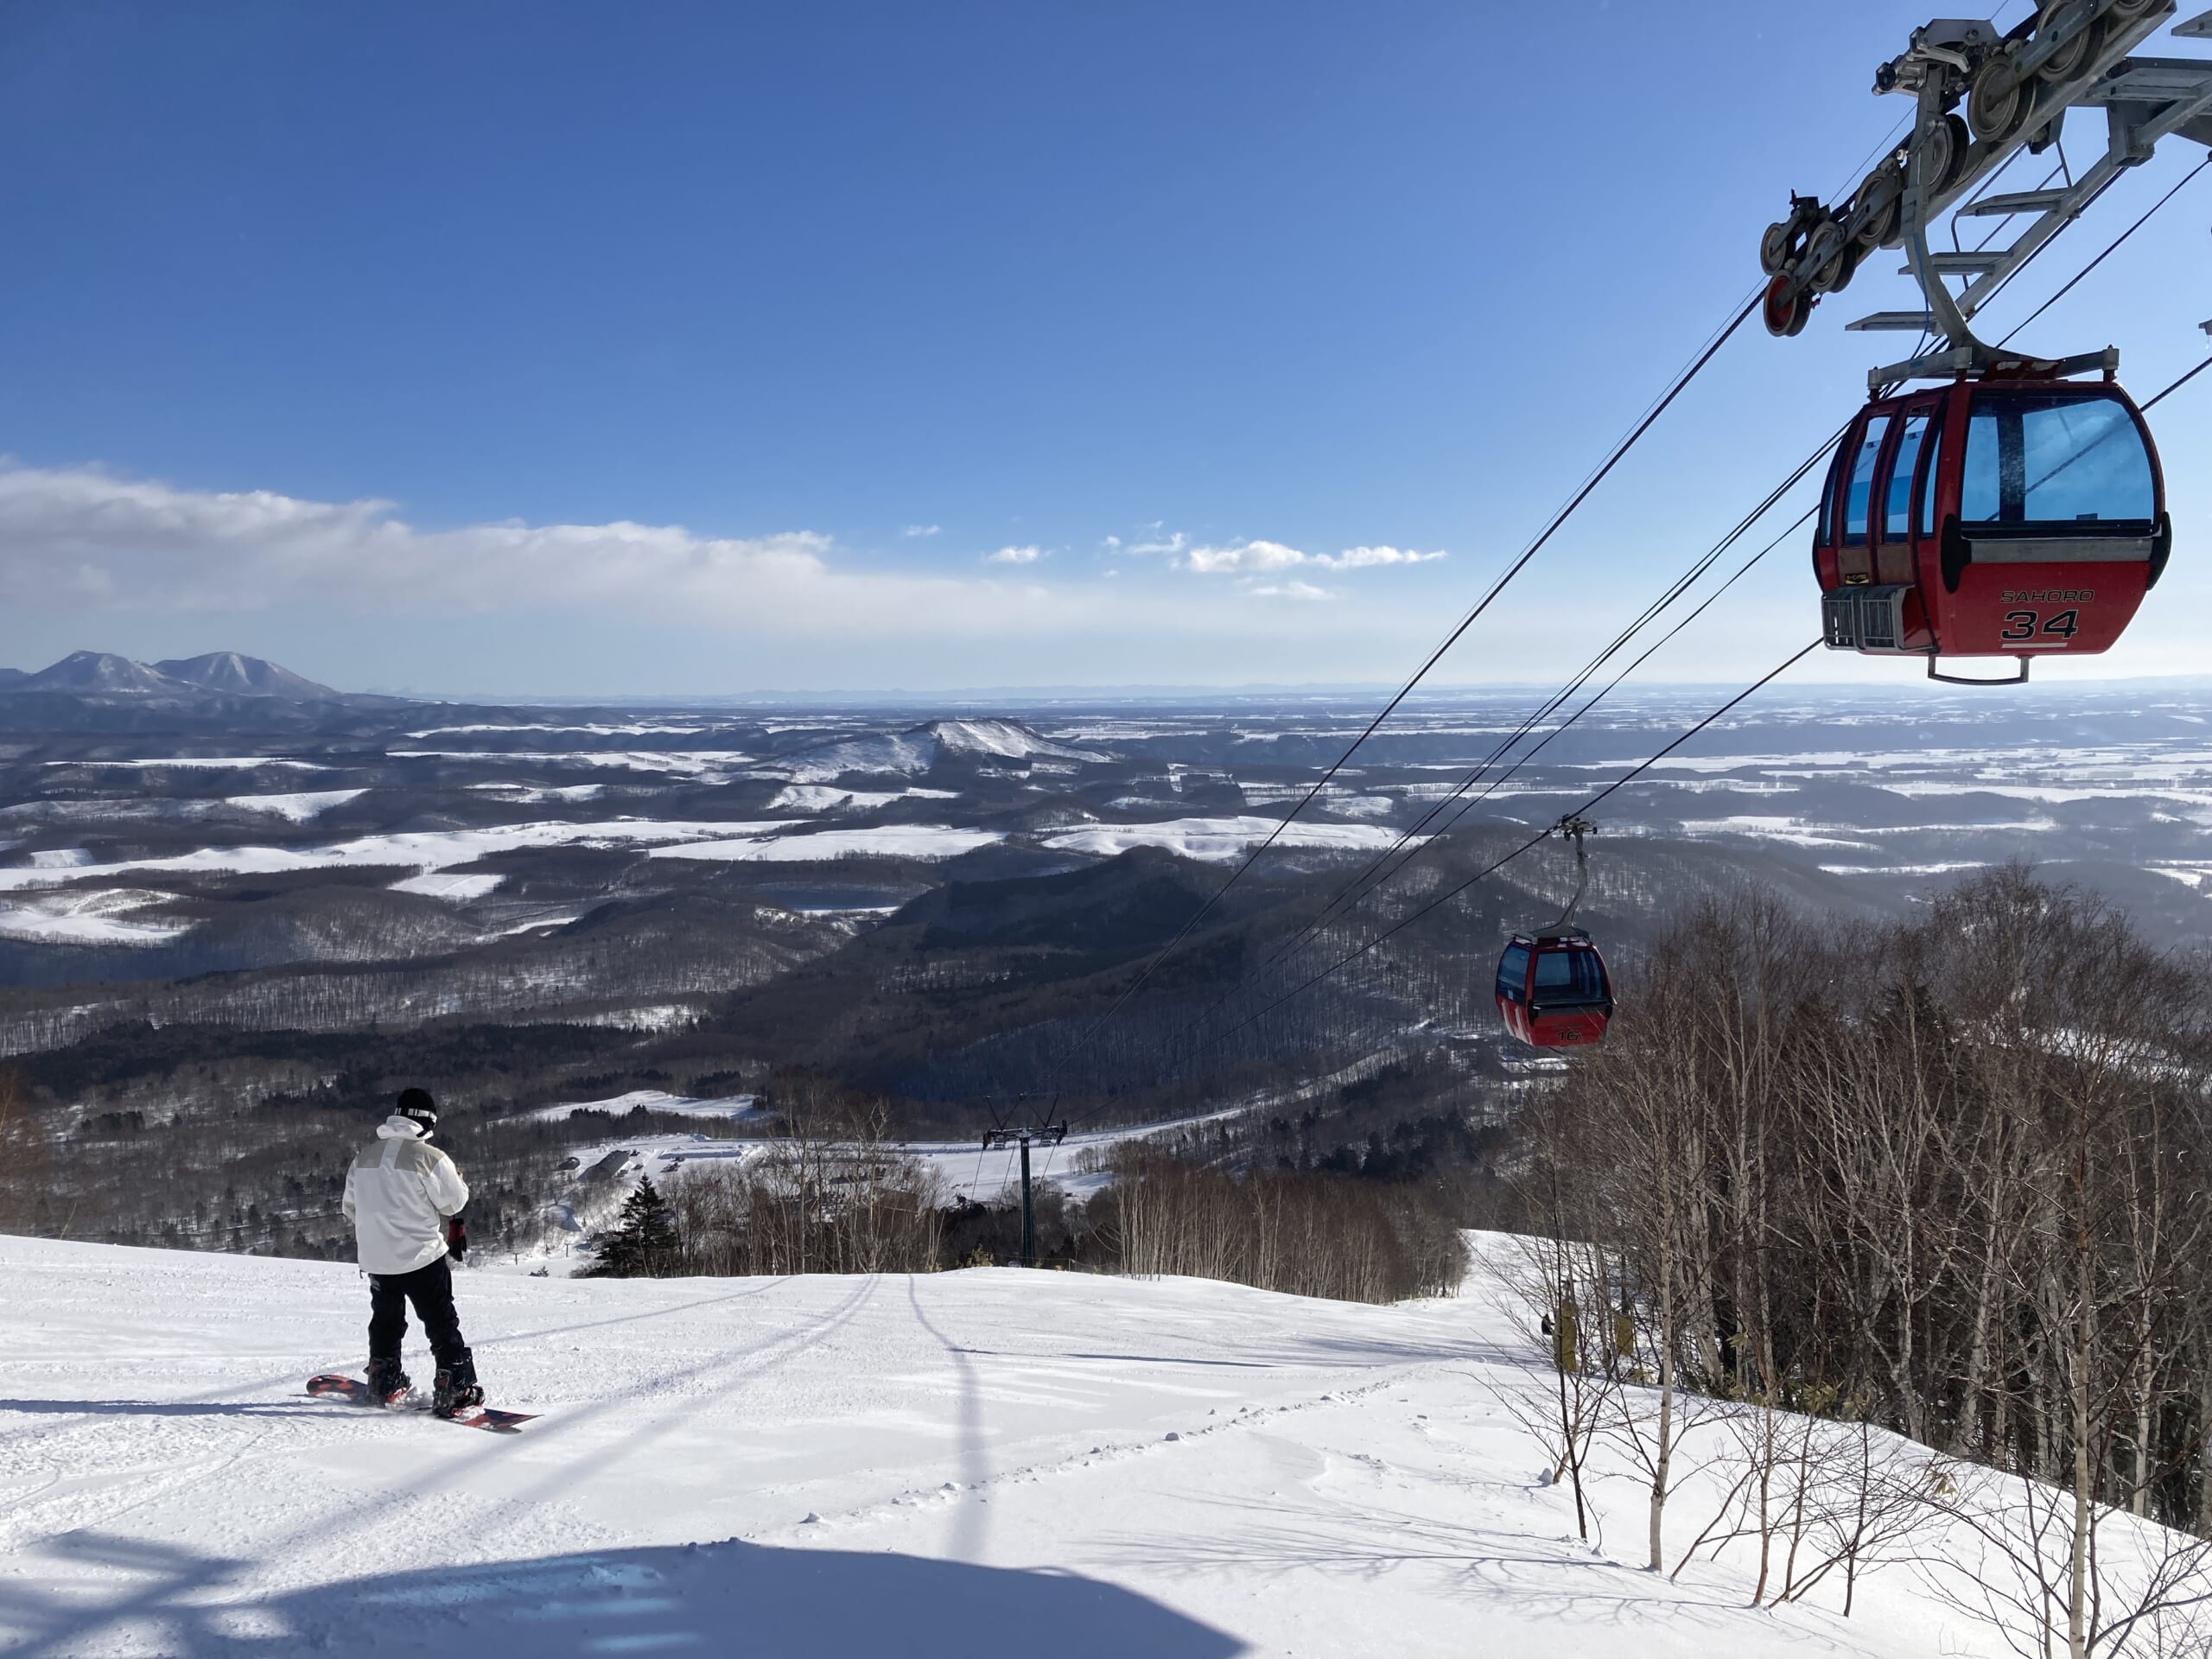 Winter in Hokkaido: Fresh Powder Snow and Local Gourmet on the Best Ski Hills in Japan